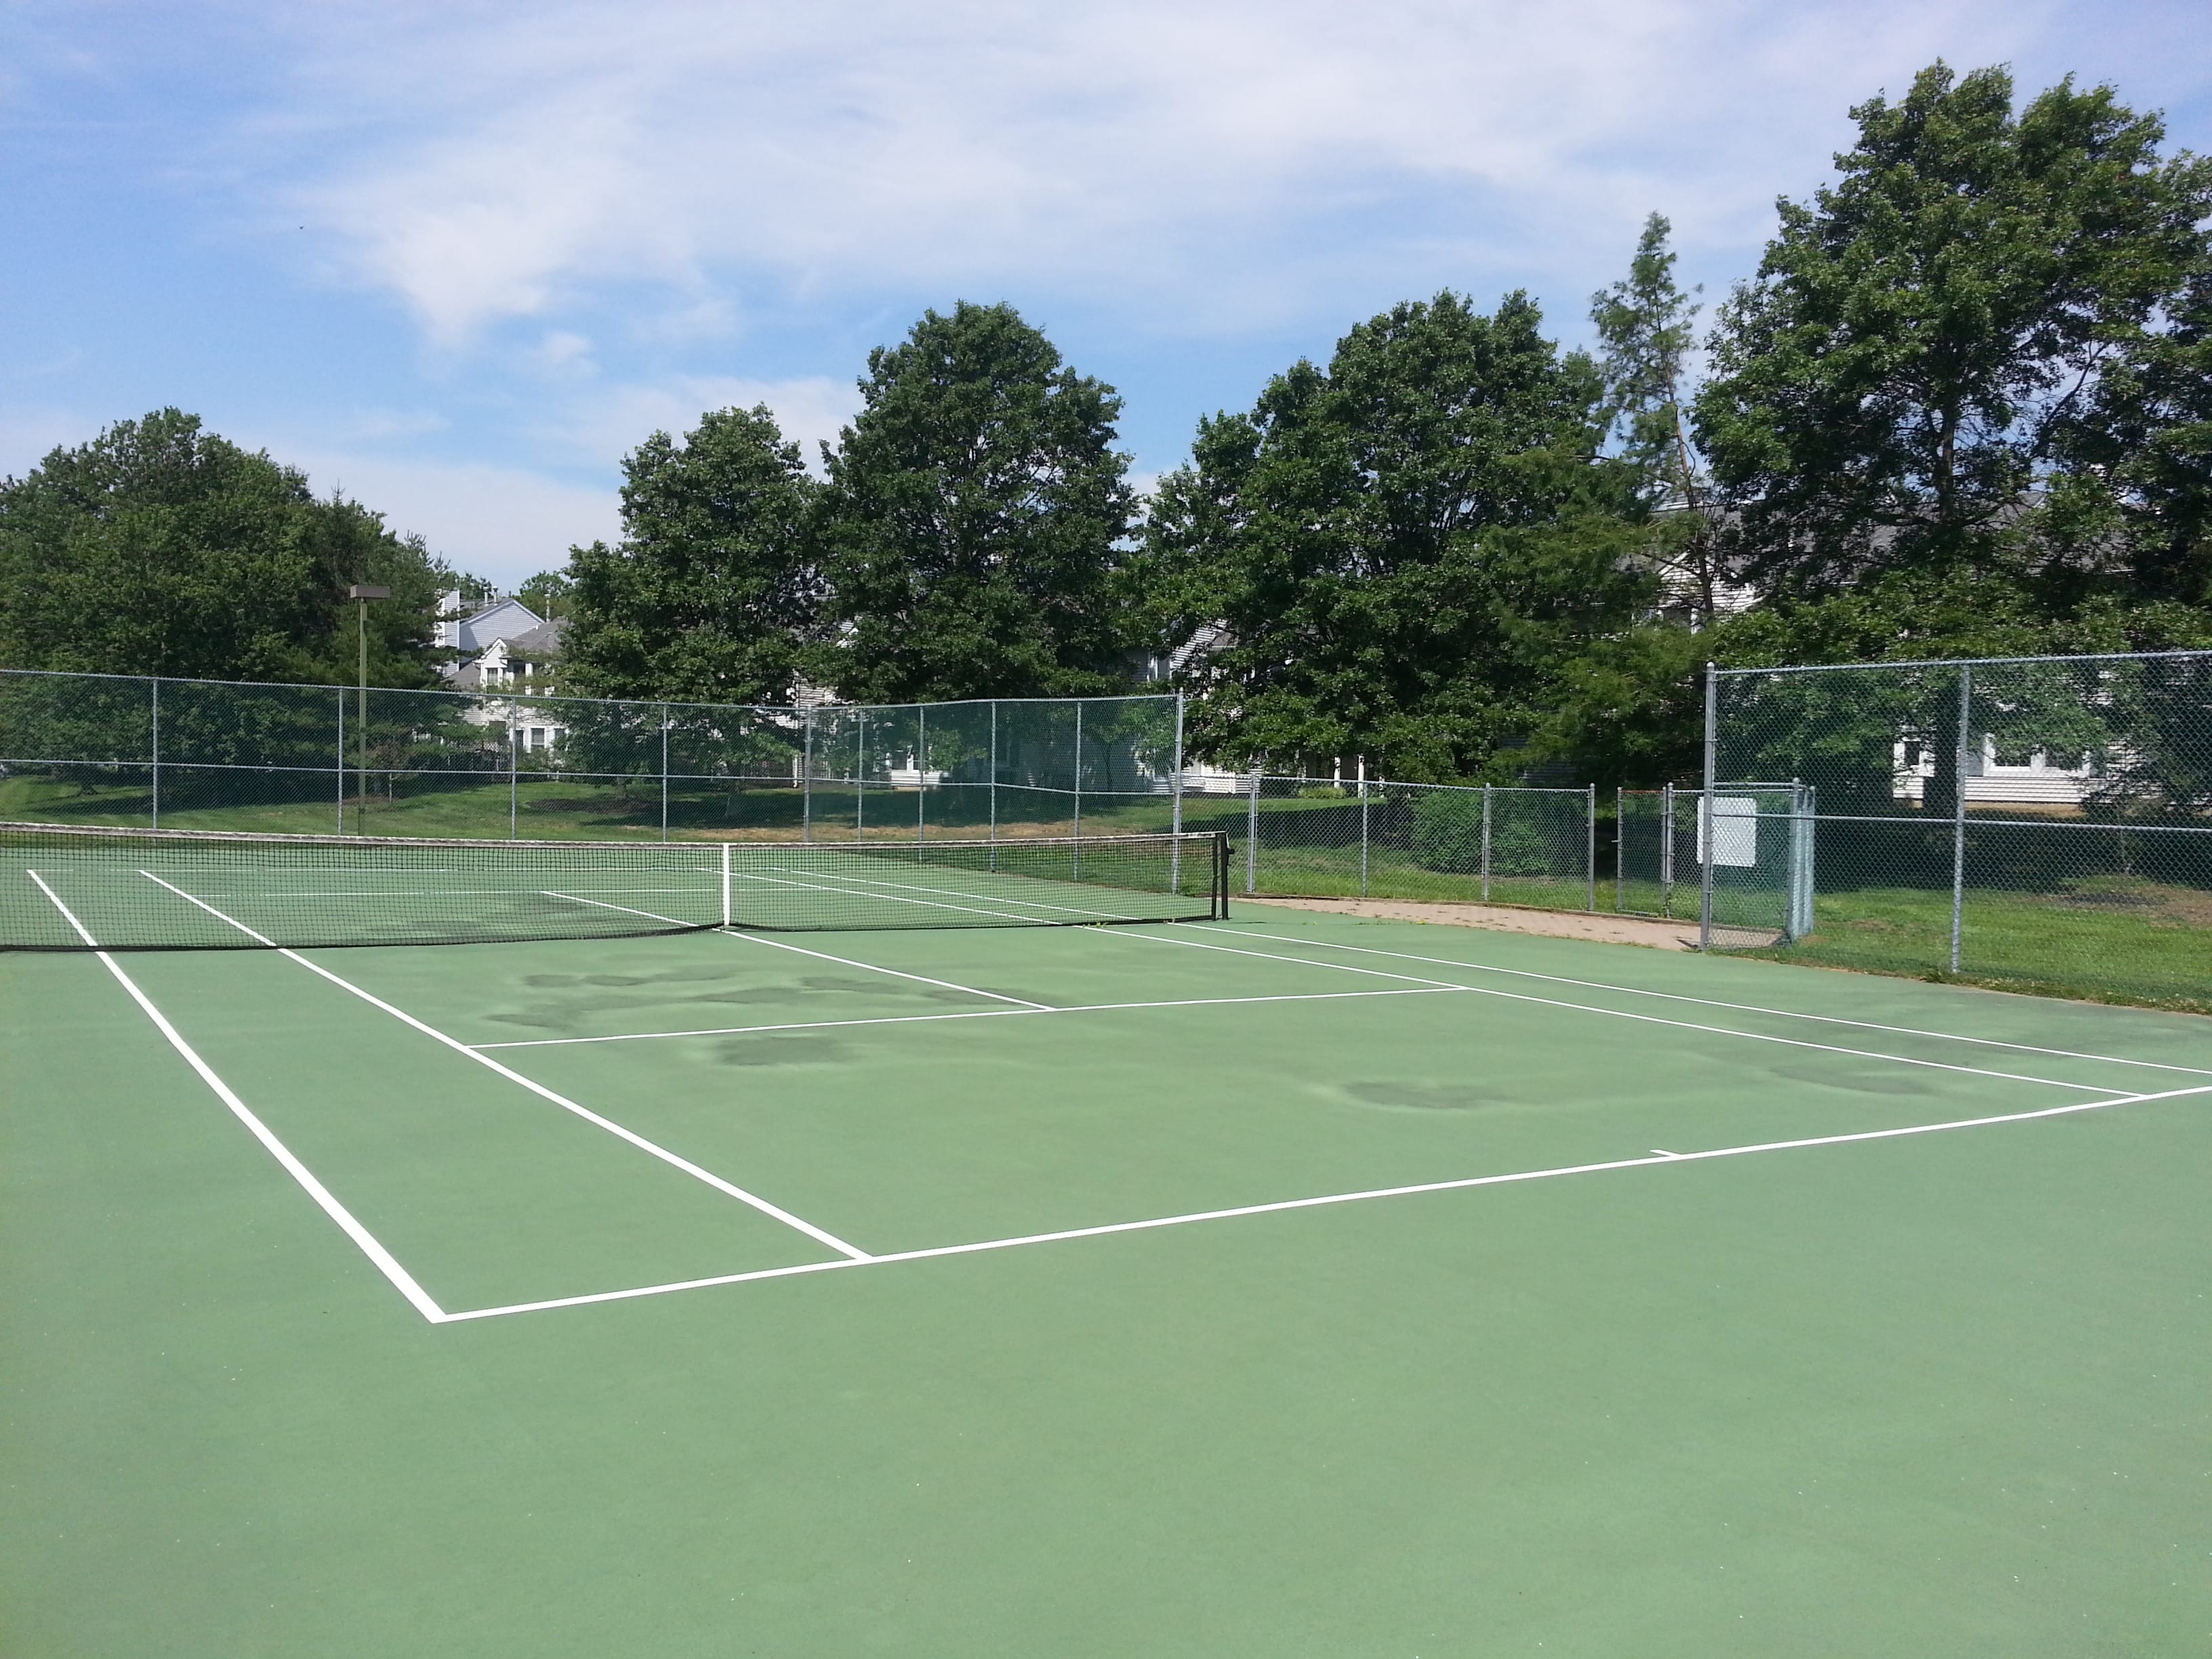 This tennis court is among the amenities at the Villas at Poplar Brook in Ocean Twp.